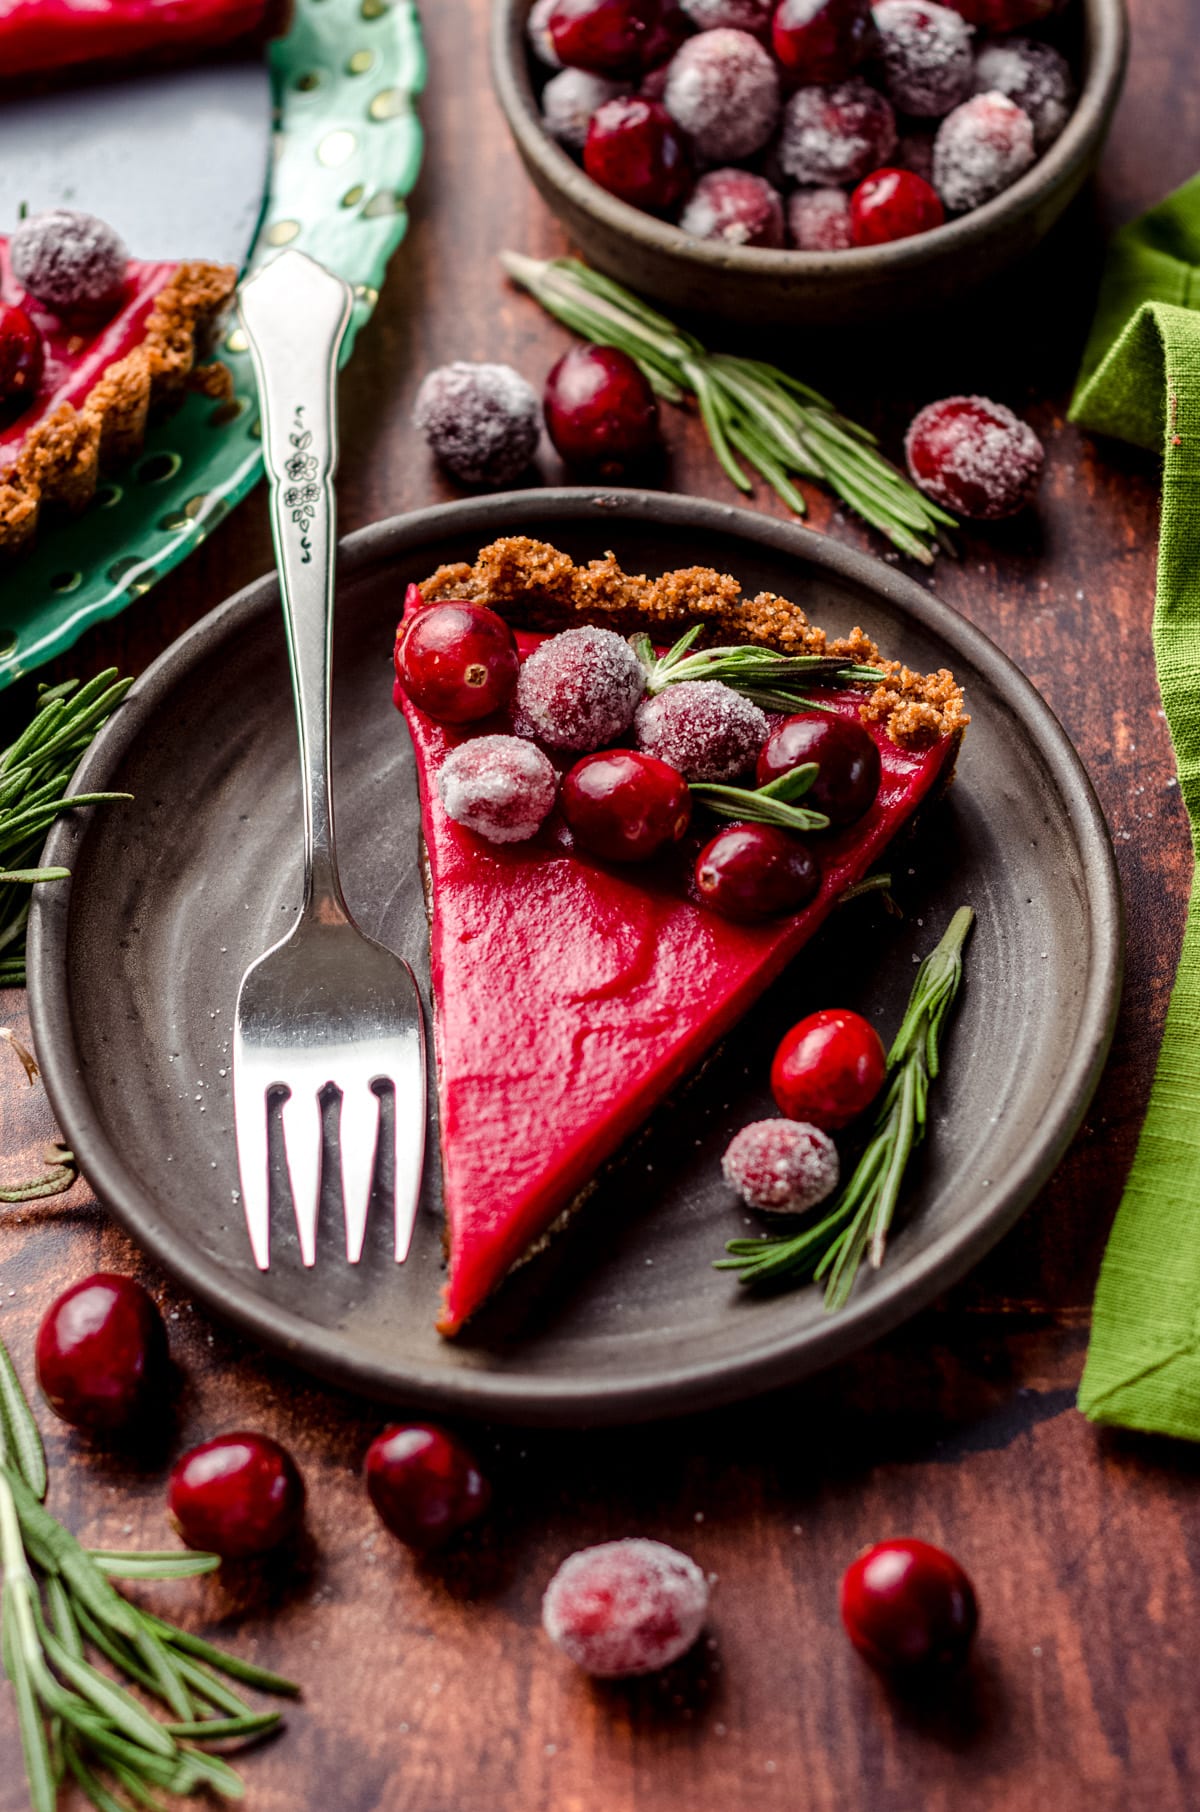 A slice of cranberry tart garnished with sugared cranberries.